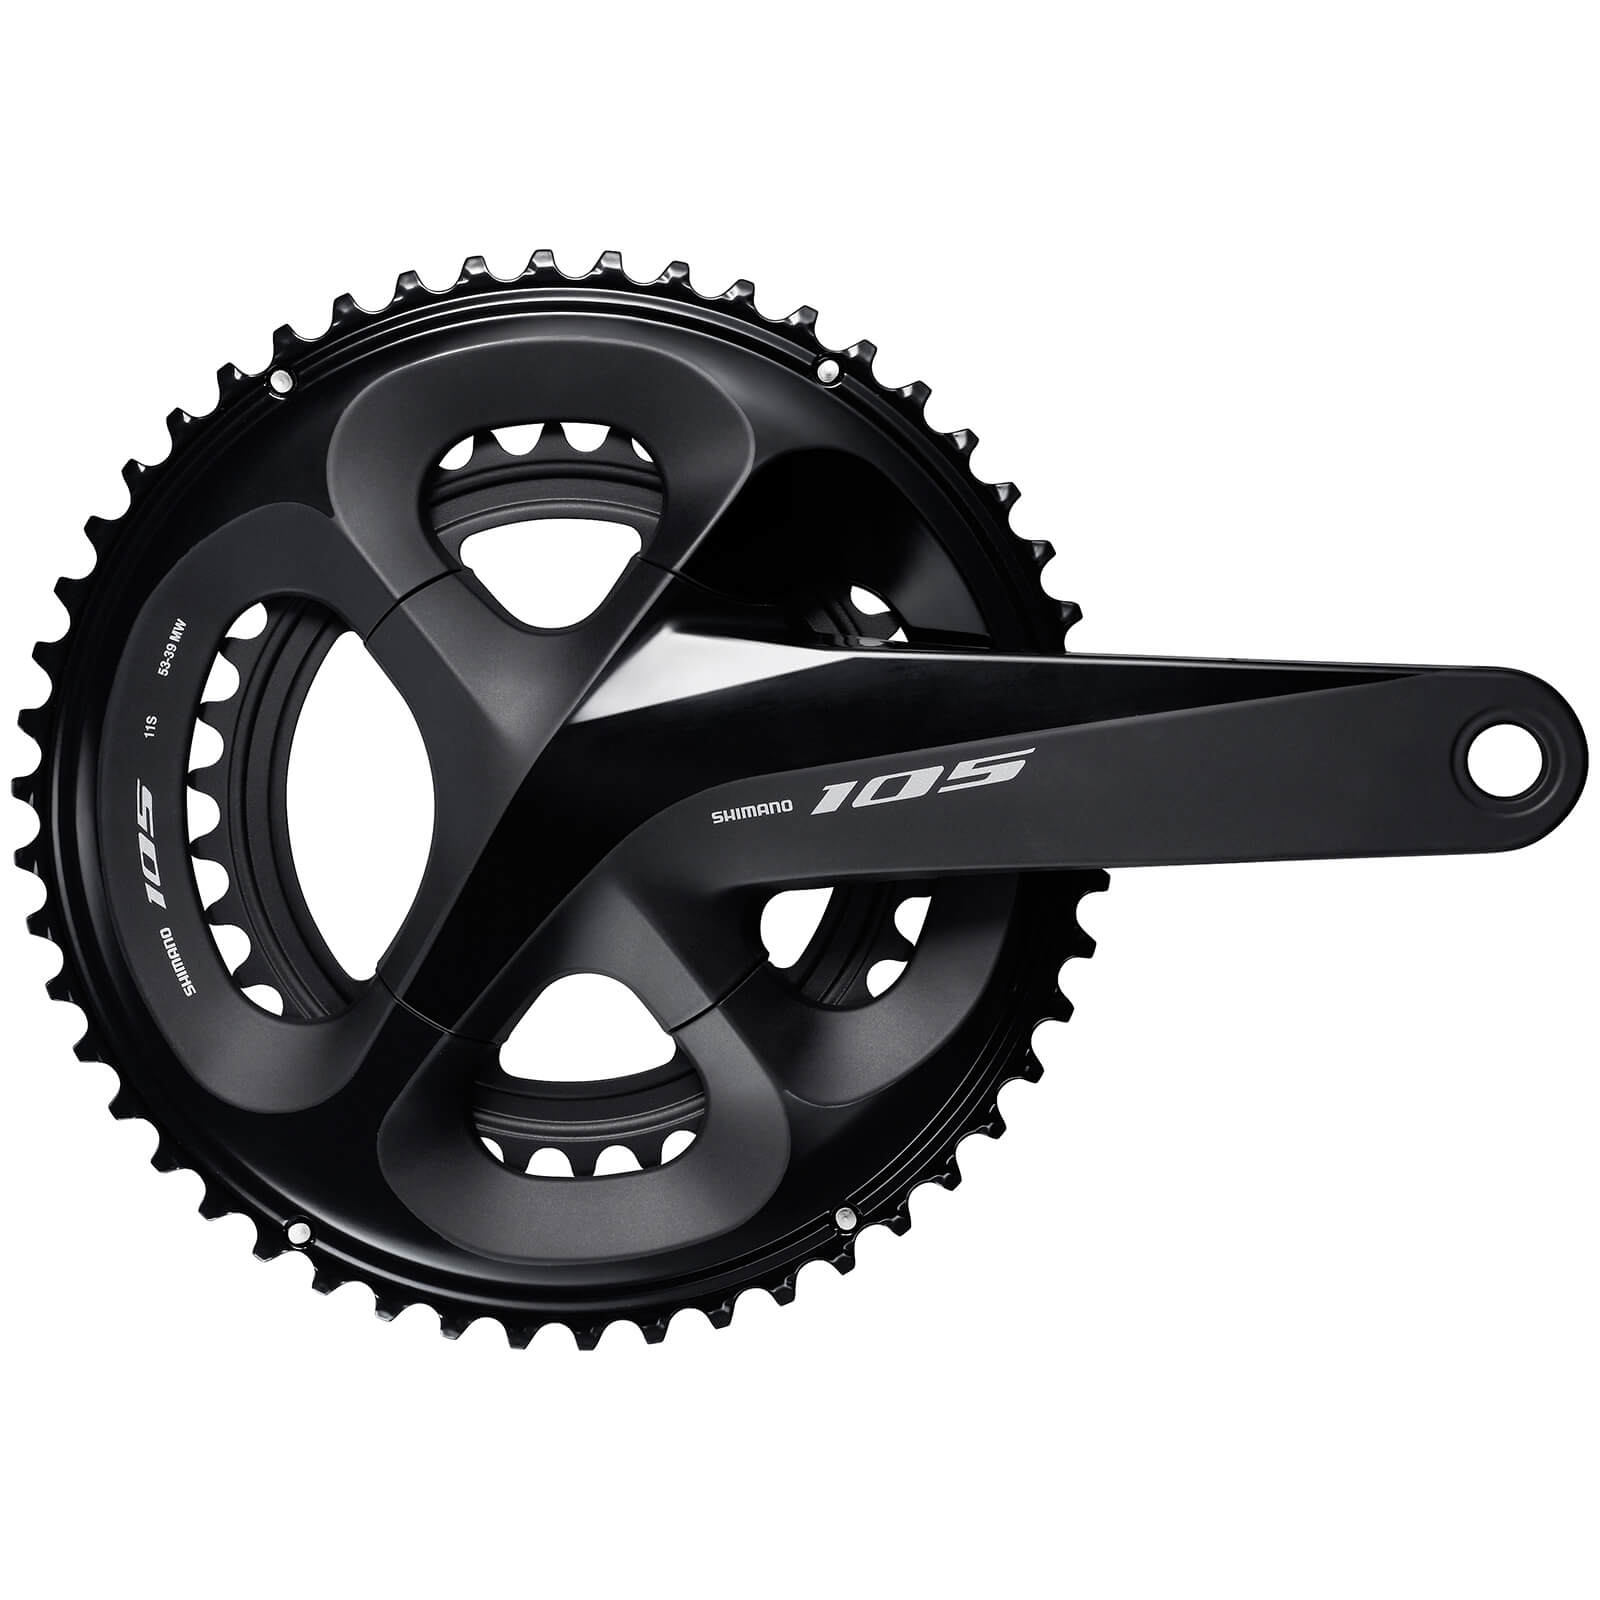 Image of Shimano 105 R7000 Chainset - 11 Speed - Black / 34/50 / 172.5mm / 11 Speed